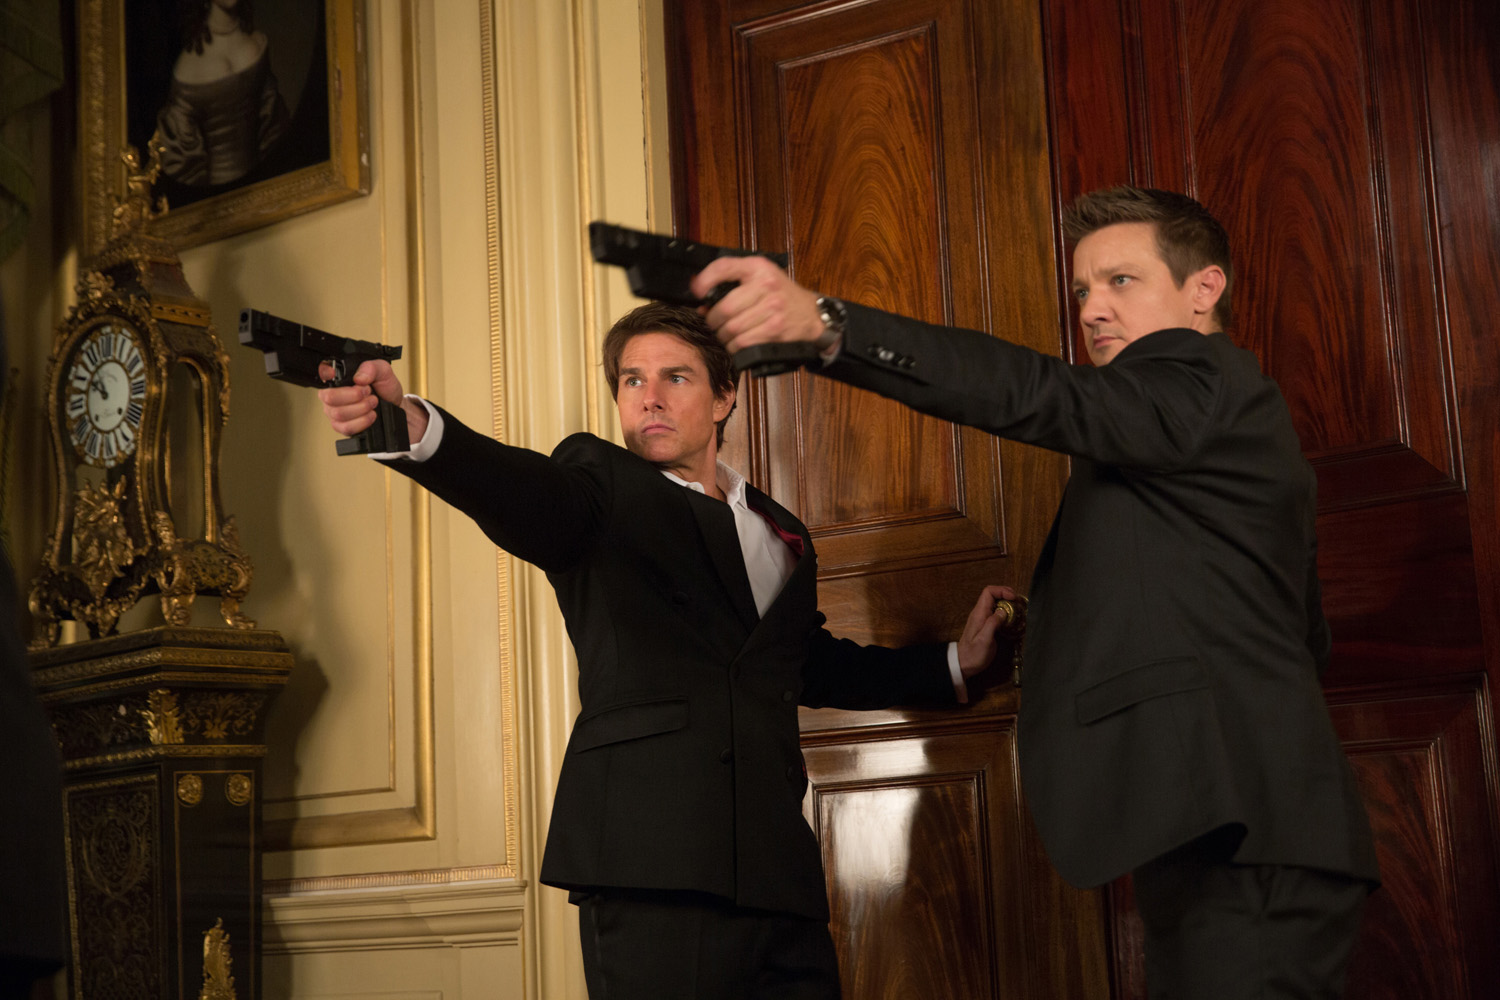 Left to right: Tom Cruise plays Ethan Hunt and Jeremy Renner plays William Brandt in Mission: Impossible – Rogue Nation from Paramount Pictures and Skydance Productions